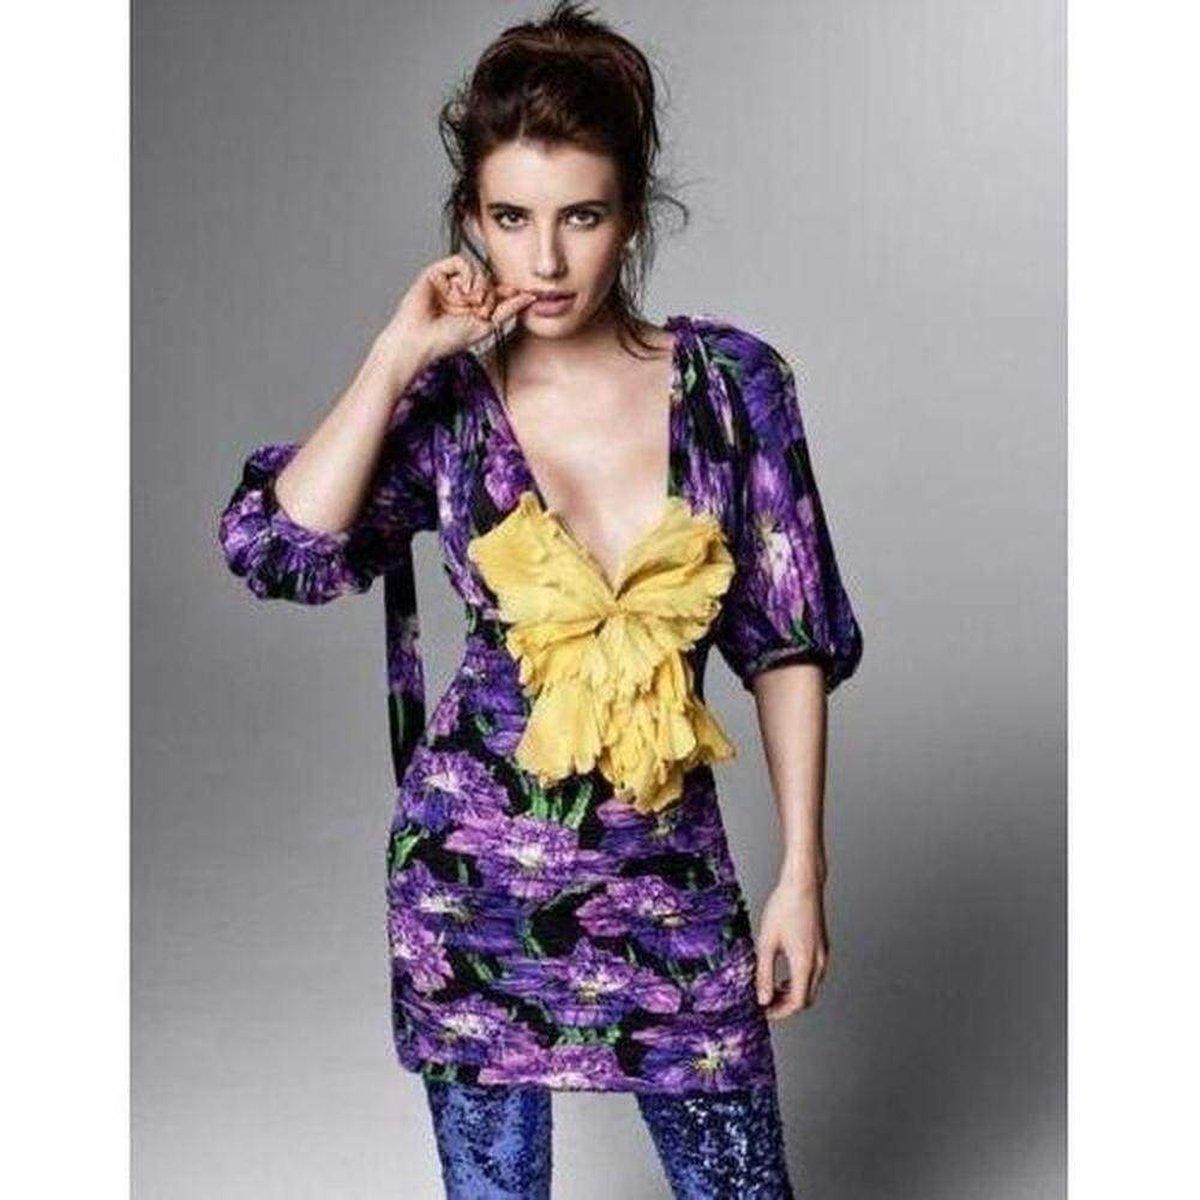 FOLLOW US @RUNWAYCATALOG

Tonal-purple, black, tonal-green, yellow floral print
Deep V-front and back neck
Elbow-length sleeves
Gathered cuffs
Self-fastening shoulder ties
Pleated front and back panels
Centre-front tonal-yellow silk flower